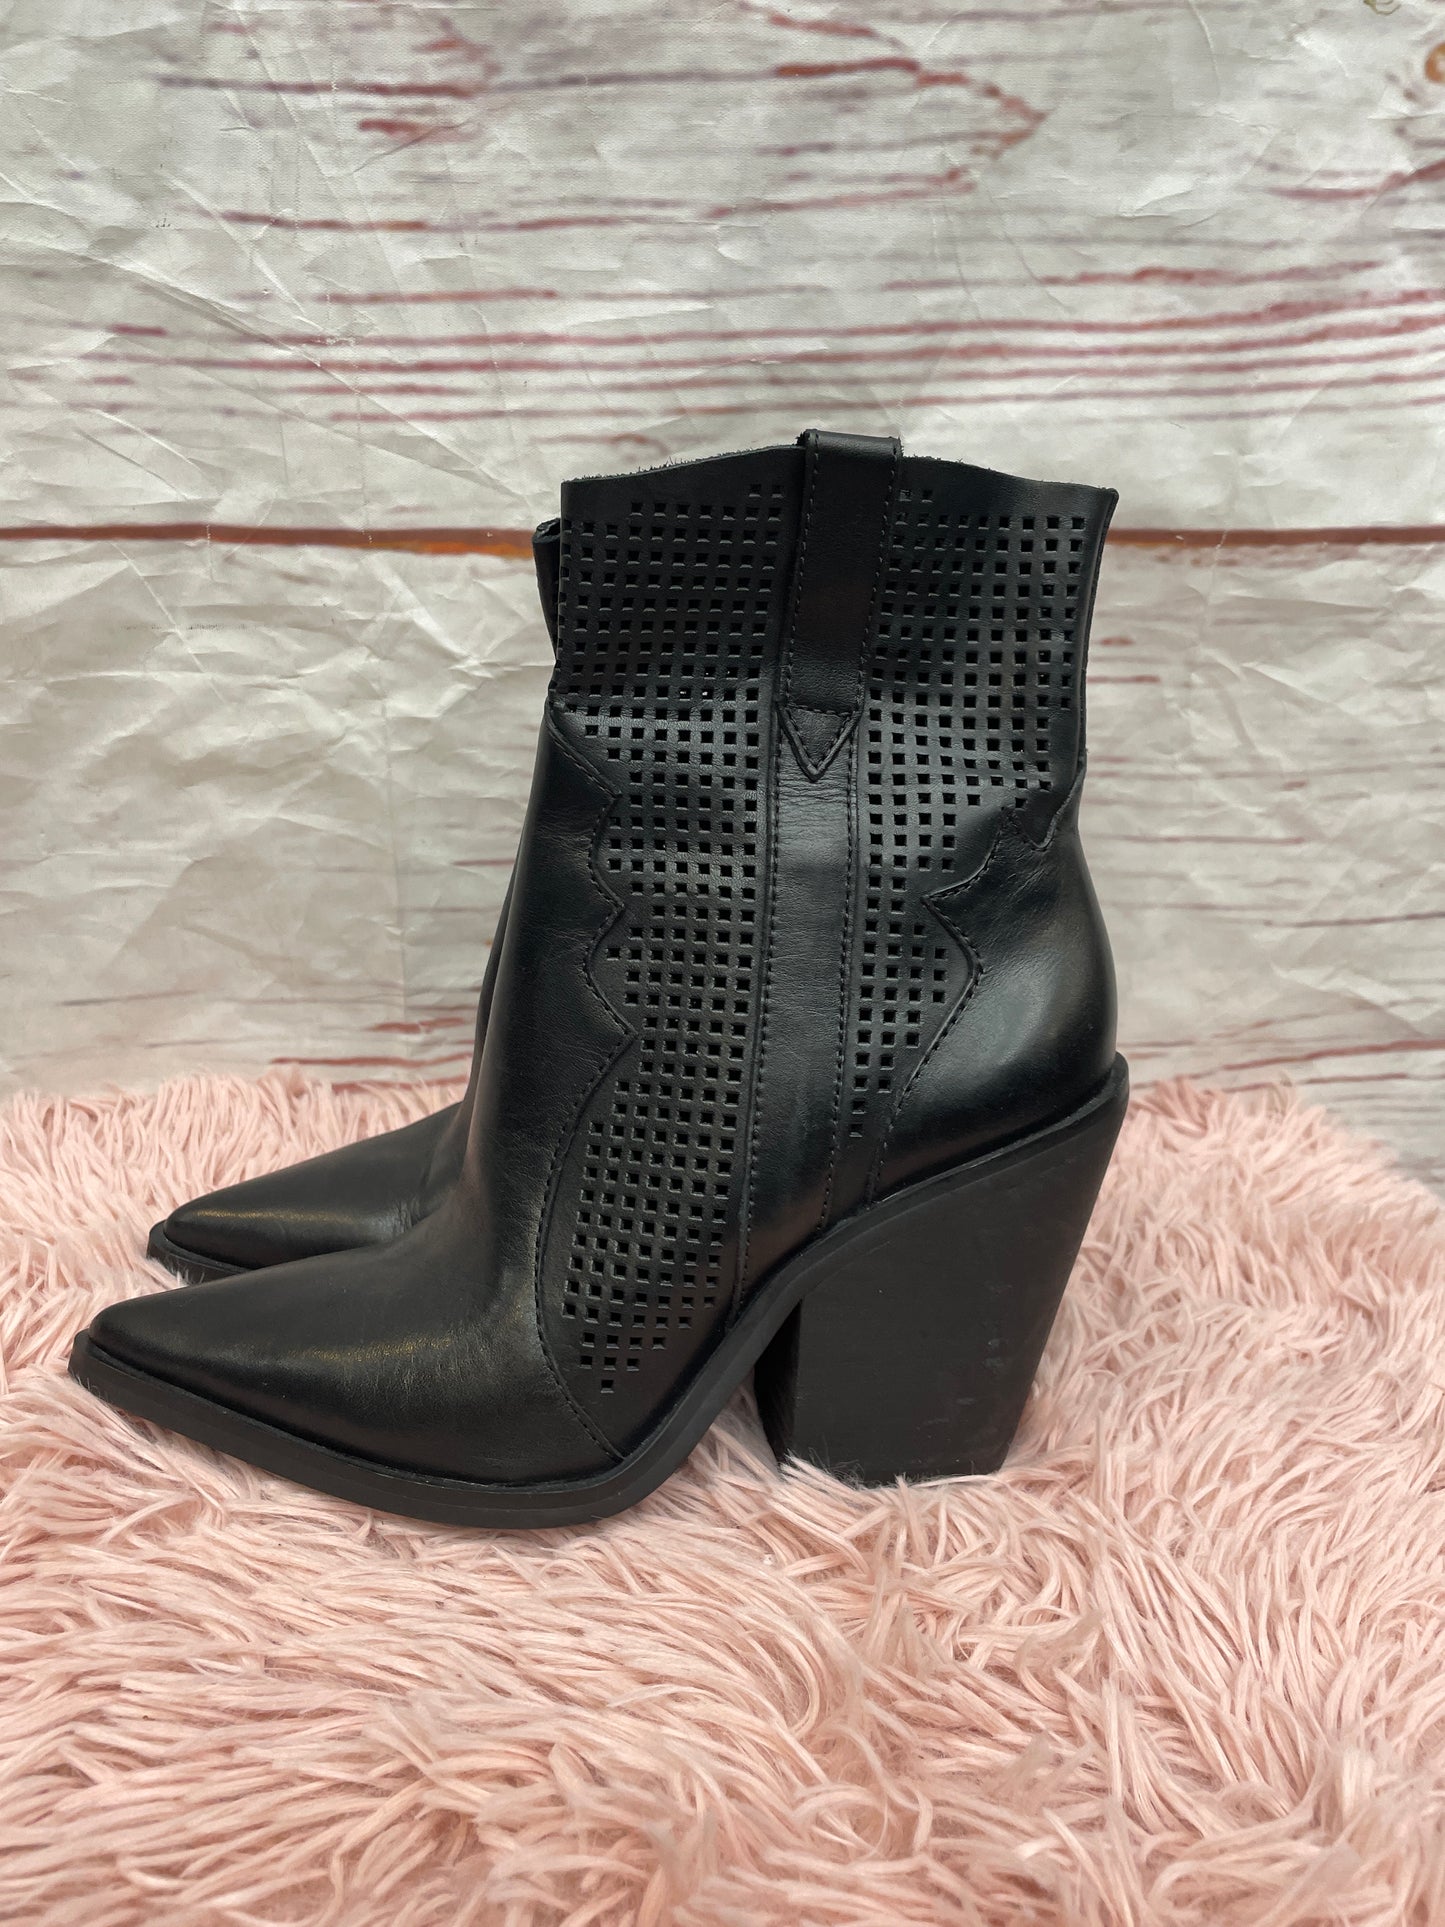 Boots Ankle Heels By Steve Madden  Size: 7.5